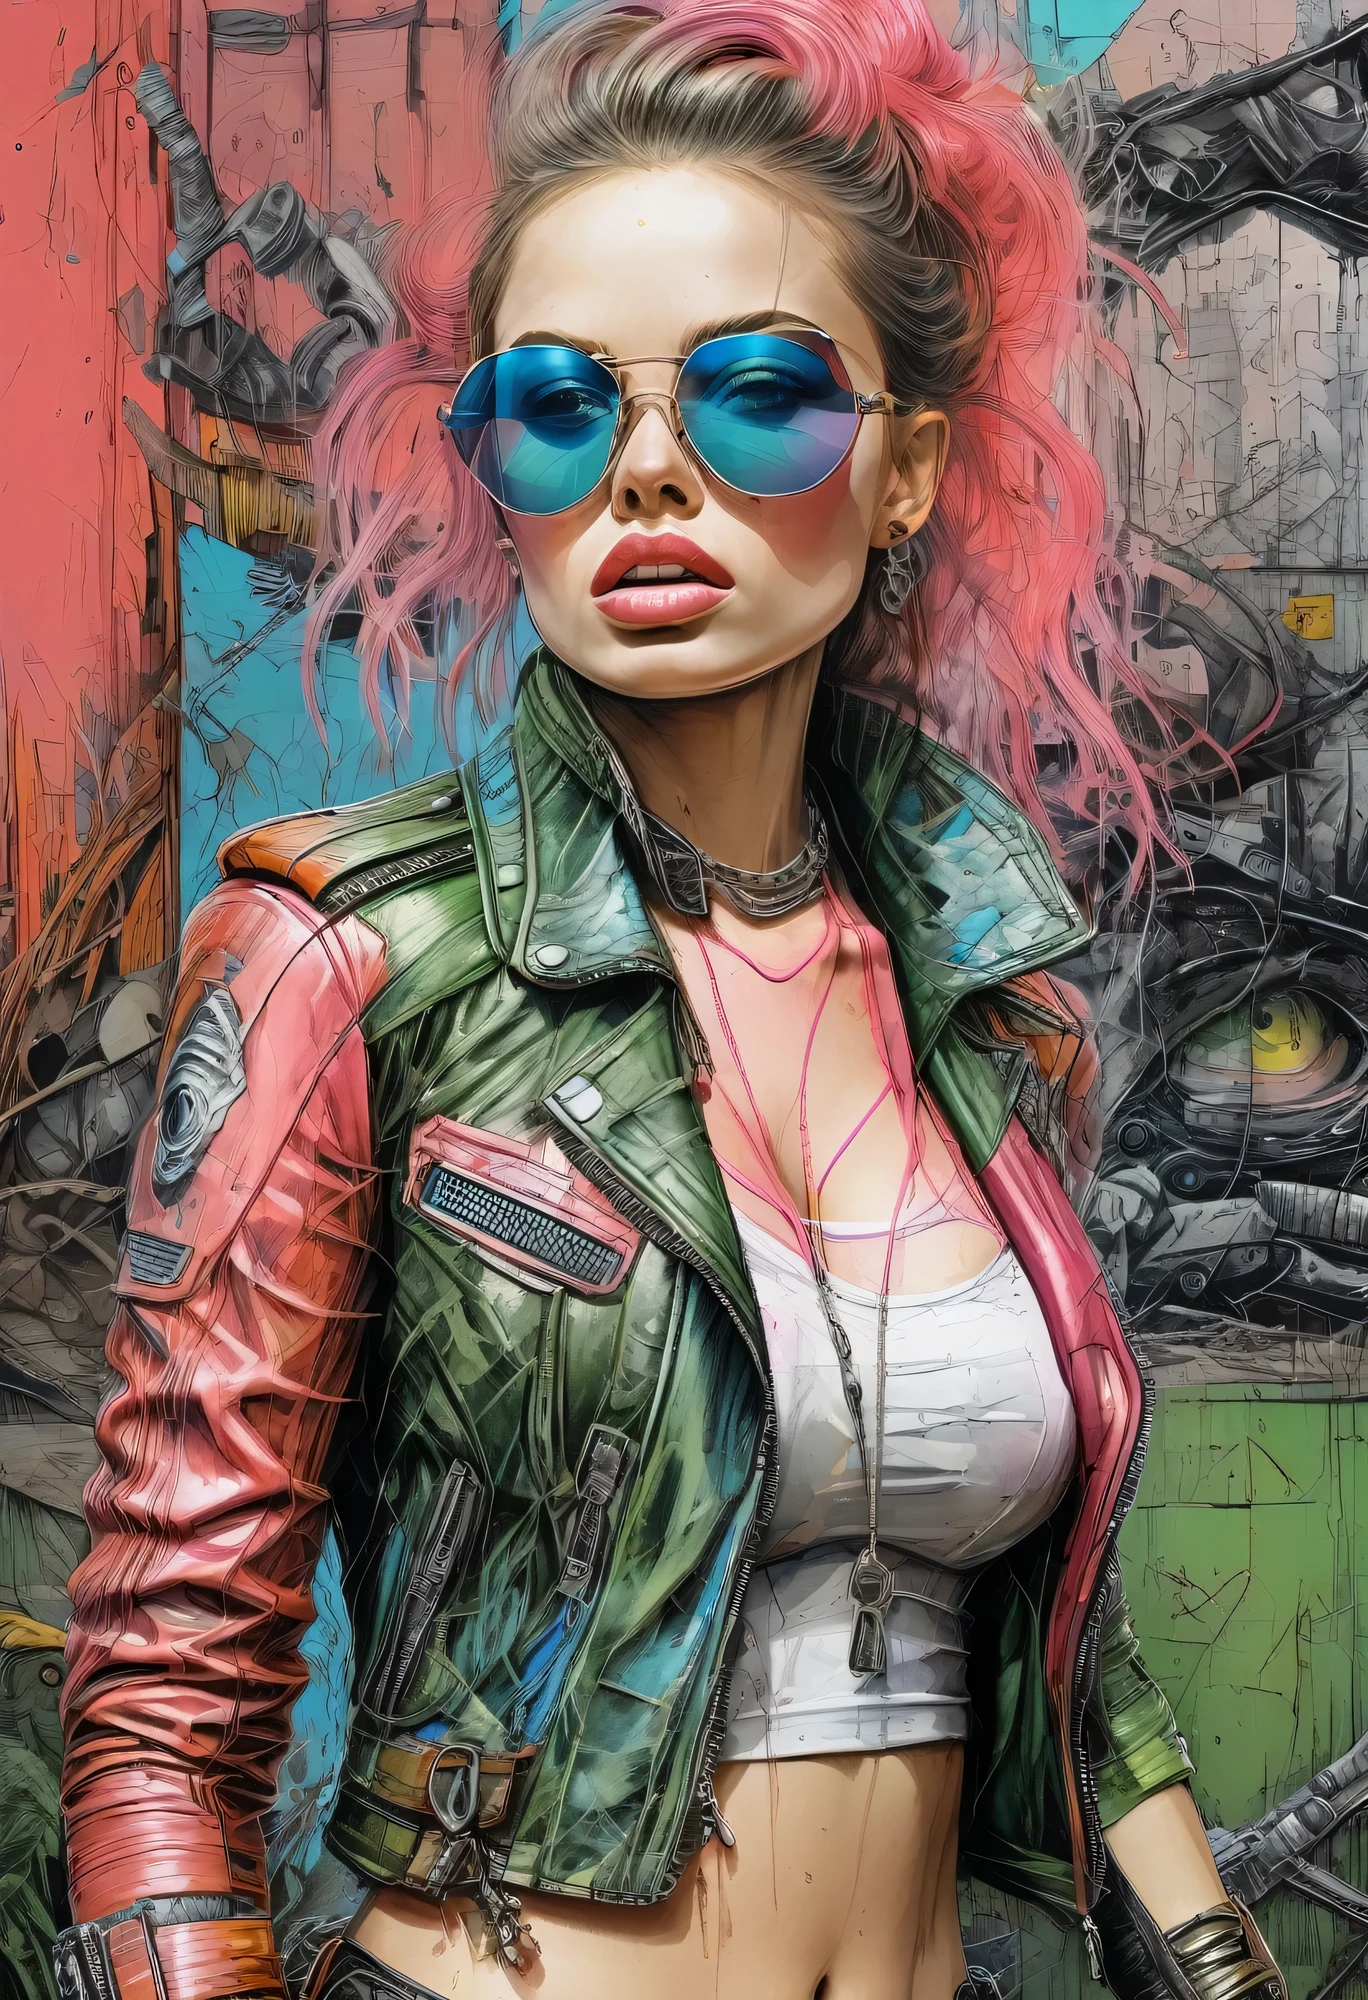 surfaces, to the intricate textures and patterns that adorn women's clothing and accessories. The viewer is drawn to the image by the intense emotion and energy that radiates from both the woman and the post-apocalyptic landscape. This masterpiece, in its highest quality resolution, is a testament to the artist's skillful combination of punk aesthetics and dynamic storytelling. (8k, hyperrealism, digital art, concept art, surrealism, cinematic, explosive, post apocalyptic, Mad Max, punk, leather, metal, Dynamics, supreme quality, intricate details, cinematic lighting, metallic surfaces) Best possible quality, Ultra resolution 8K, Stunning illustration, best of all, Awarded, like being the best, pink leather jacket, pink sunglasses: 1.3, light ripped and frayed jeans, ((colors pink, cyan, brown, green, white: 1.5) ), epic desert setting: 1.5, photorealistic: 1.4, skin texture: 1.4, super masterpiece, super detailed, hyper detailed, 32K
